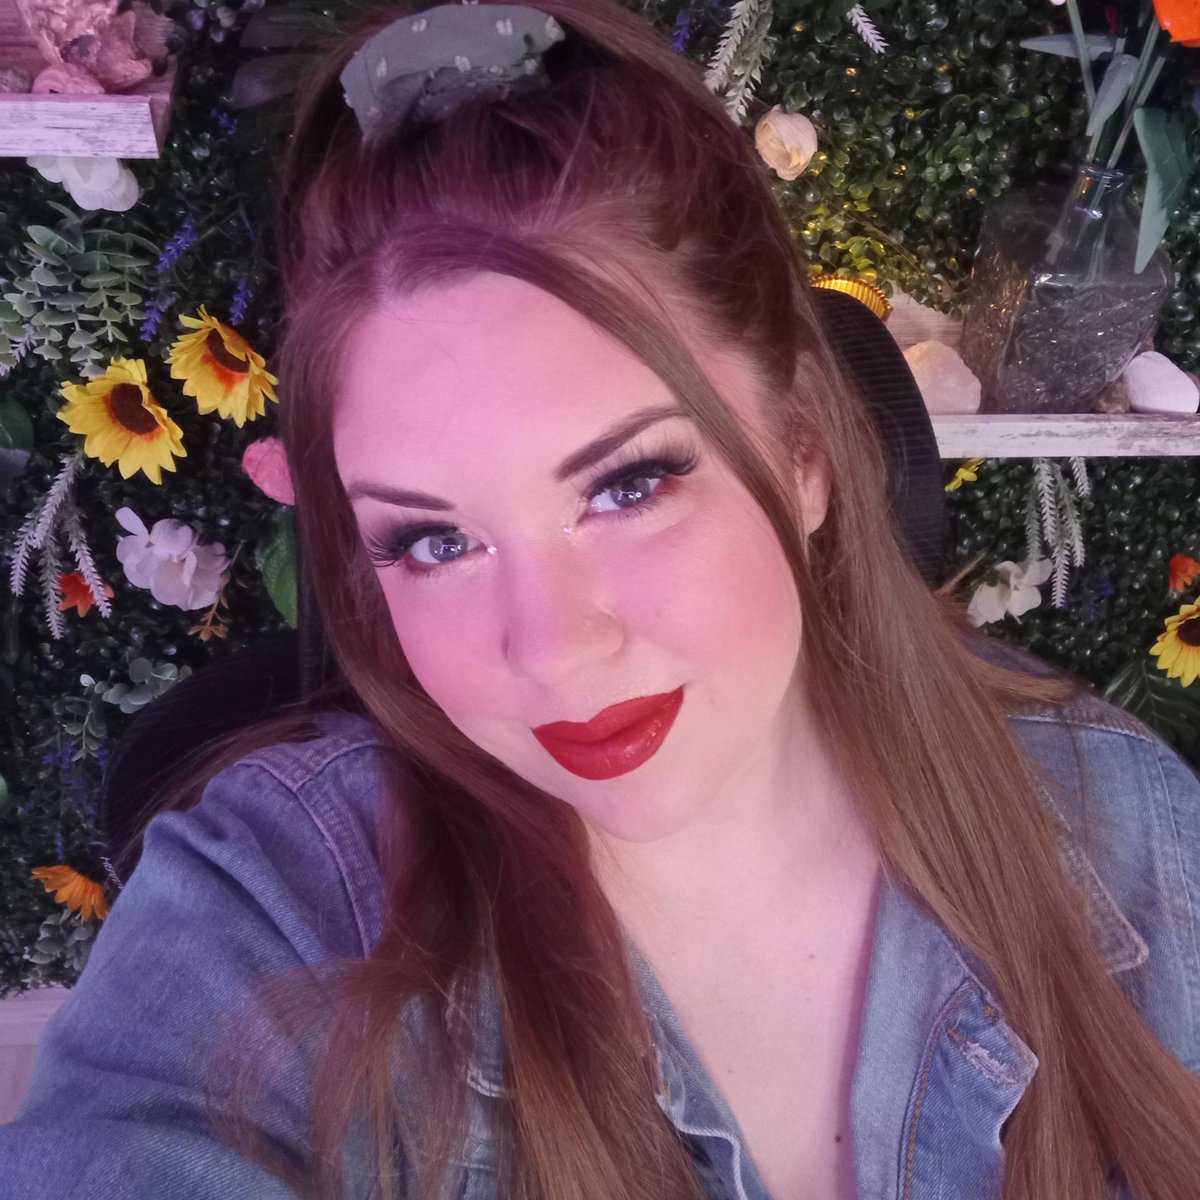 🤜🐴It's horse smacking time! Come join me as we return to Red Dead Redemption 2!🤩 🌺Live right now on twitch.tv/brittars 🌺 #reddeadredemption2 #rdr2 #rockstargames #firstplaythrough #twitch #twitchstreamer #makeuplook #goinglive #selfie #nowlive #livenow